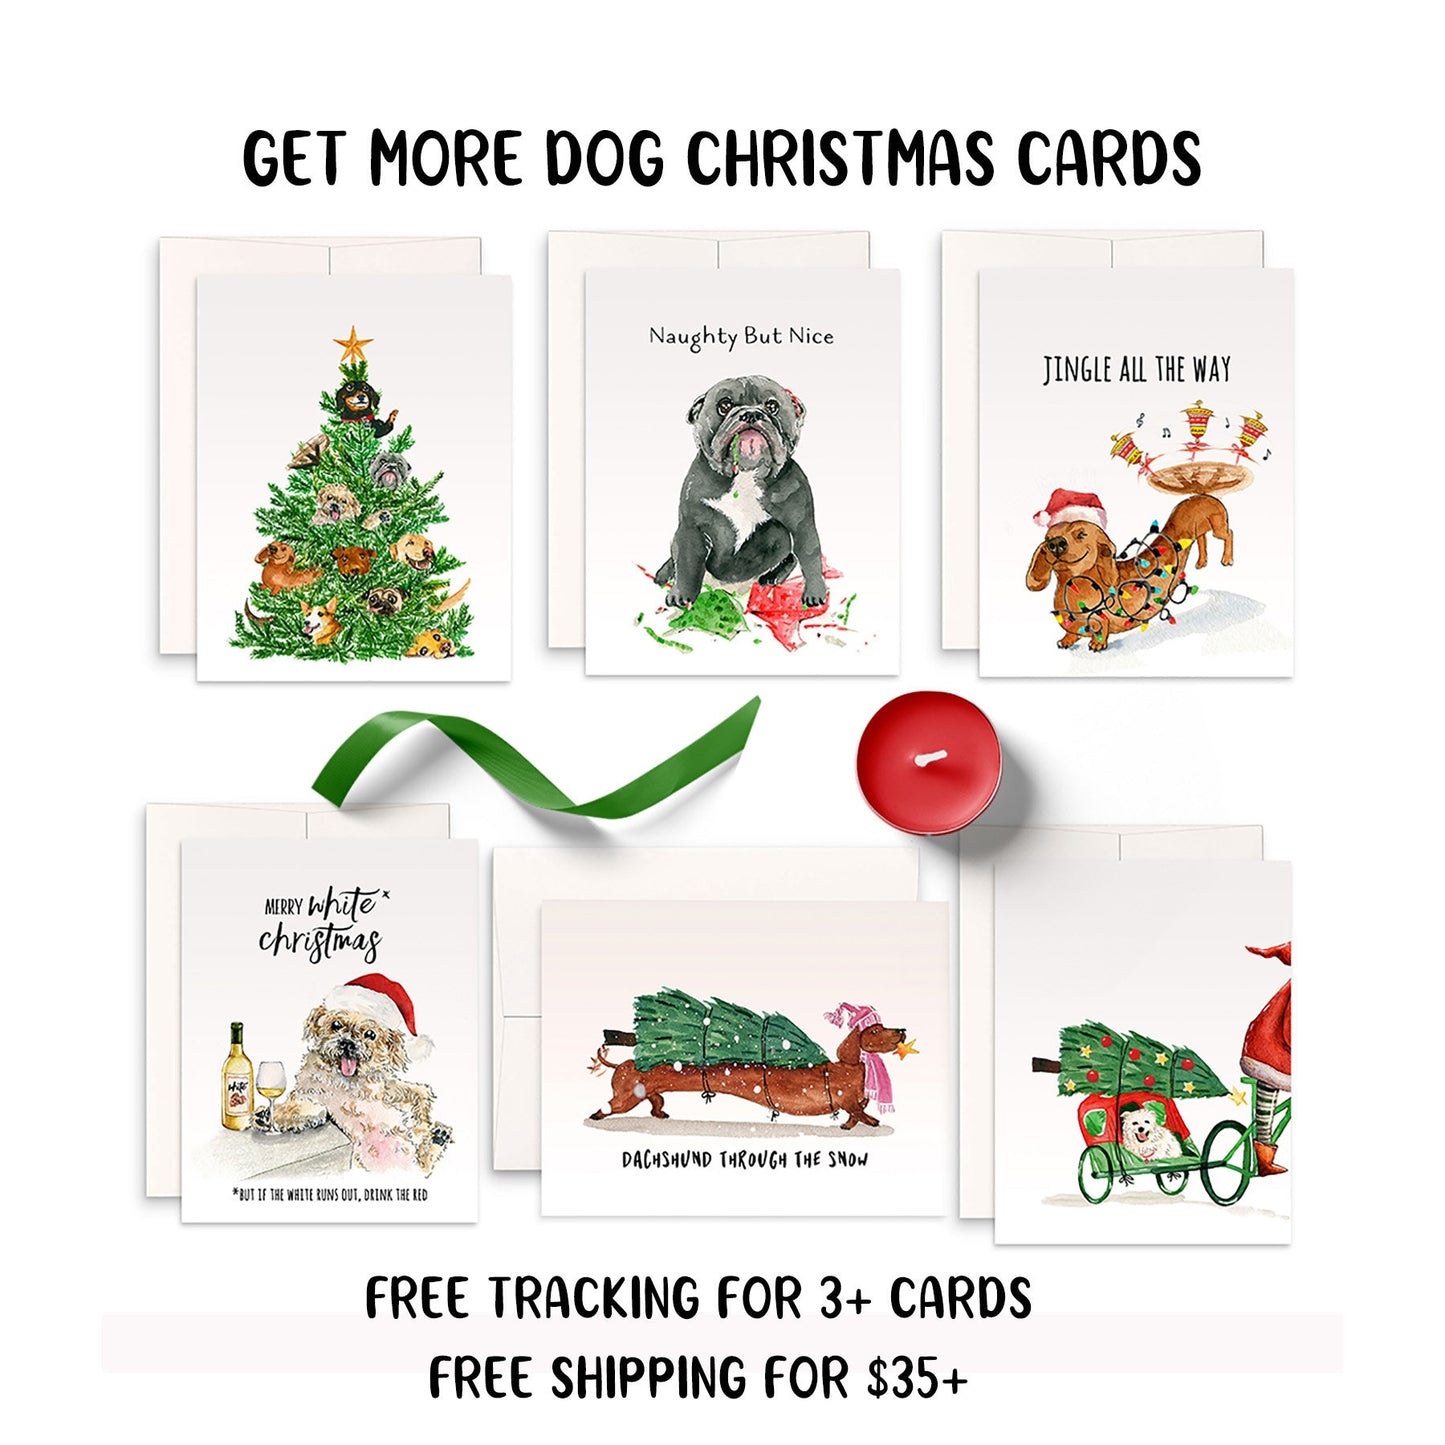 Dog White Christmas Card Funny - Golden Retriever Dog Car Ride Funny Holiday Cards For Dog Lovers - Handmade By Liyana Studio Greetings